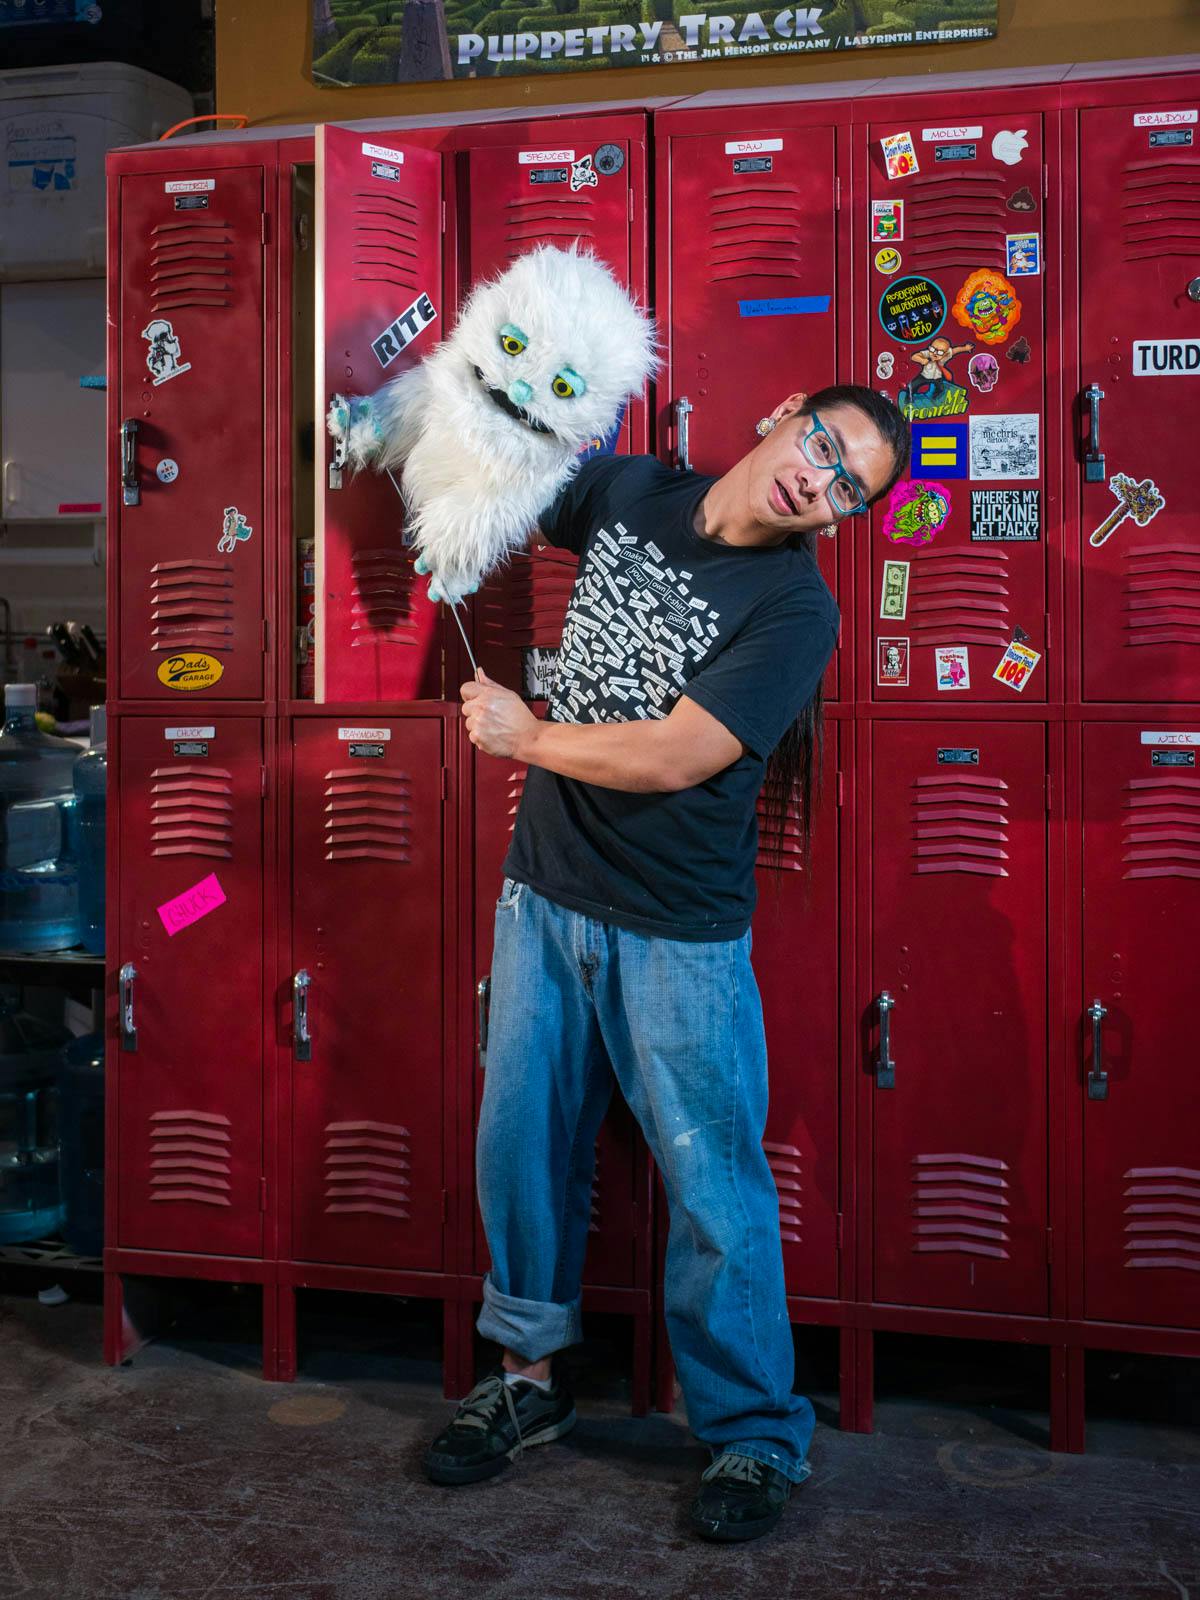 A puppeteer standing in front of red lockers, holding a puppet.